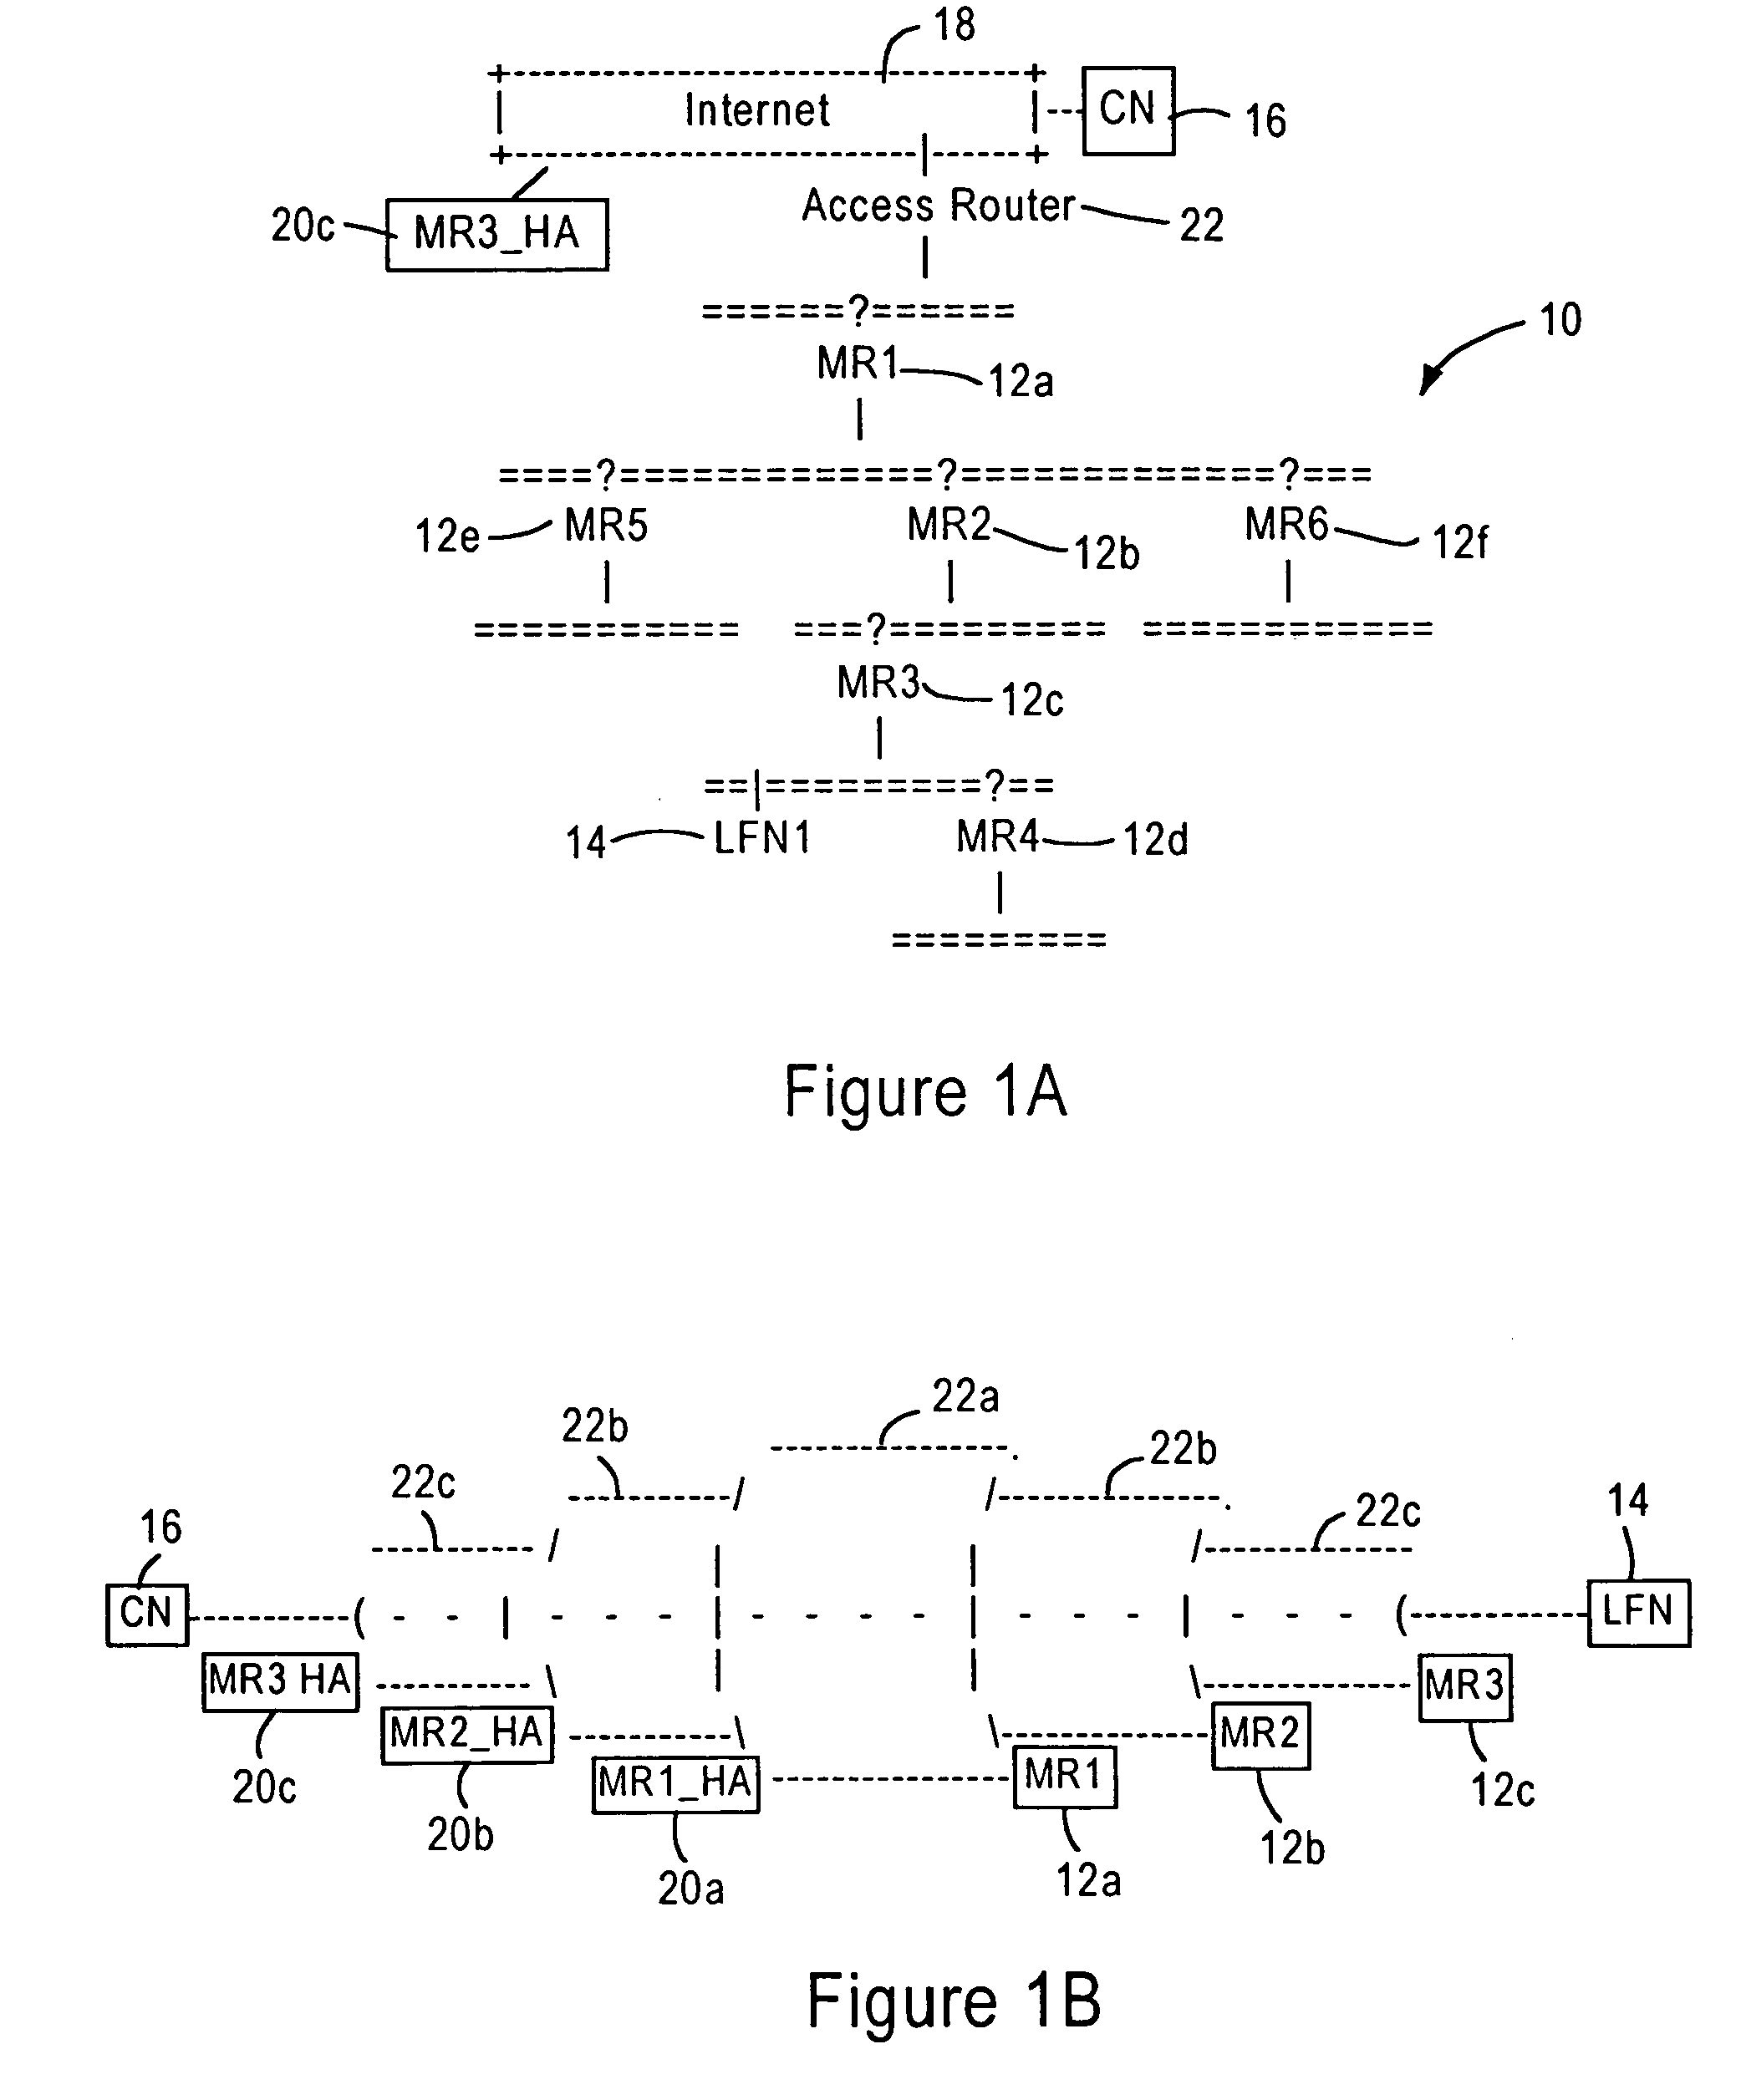 Arrangement in a router of a mobile network for optimizing use of messages carrying reverse routing headers